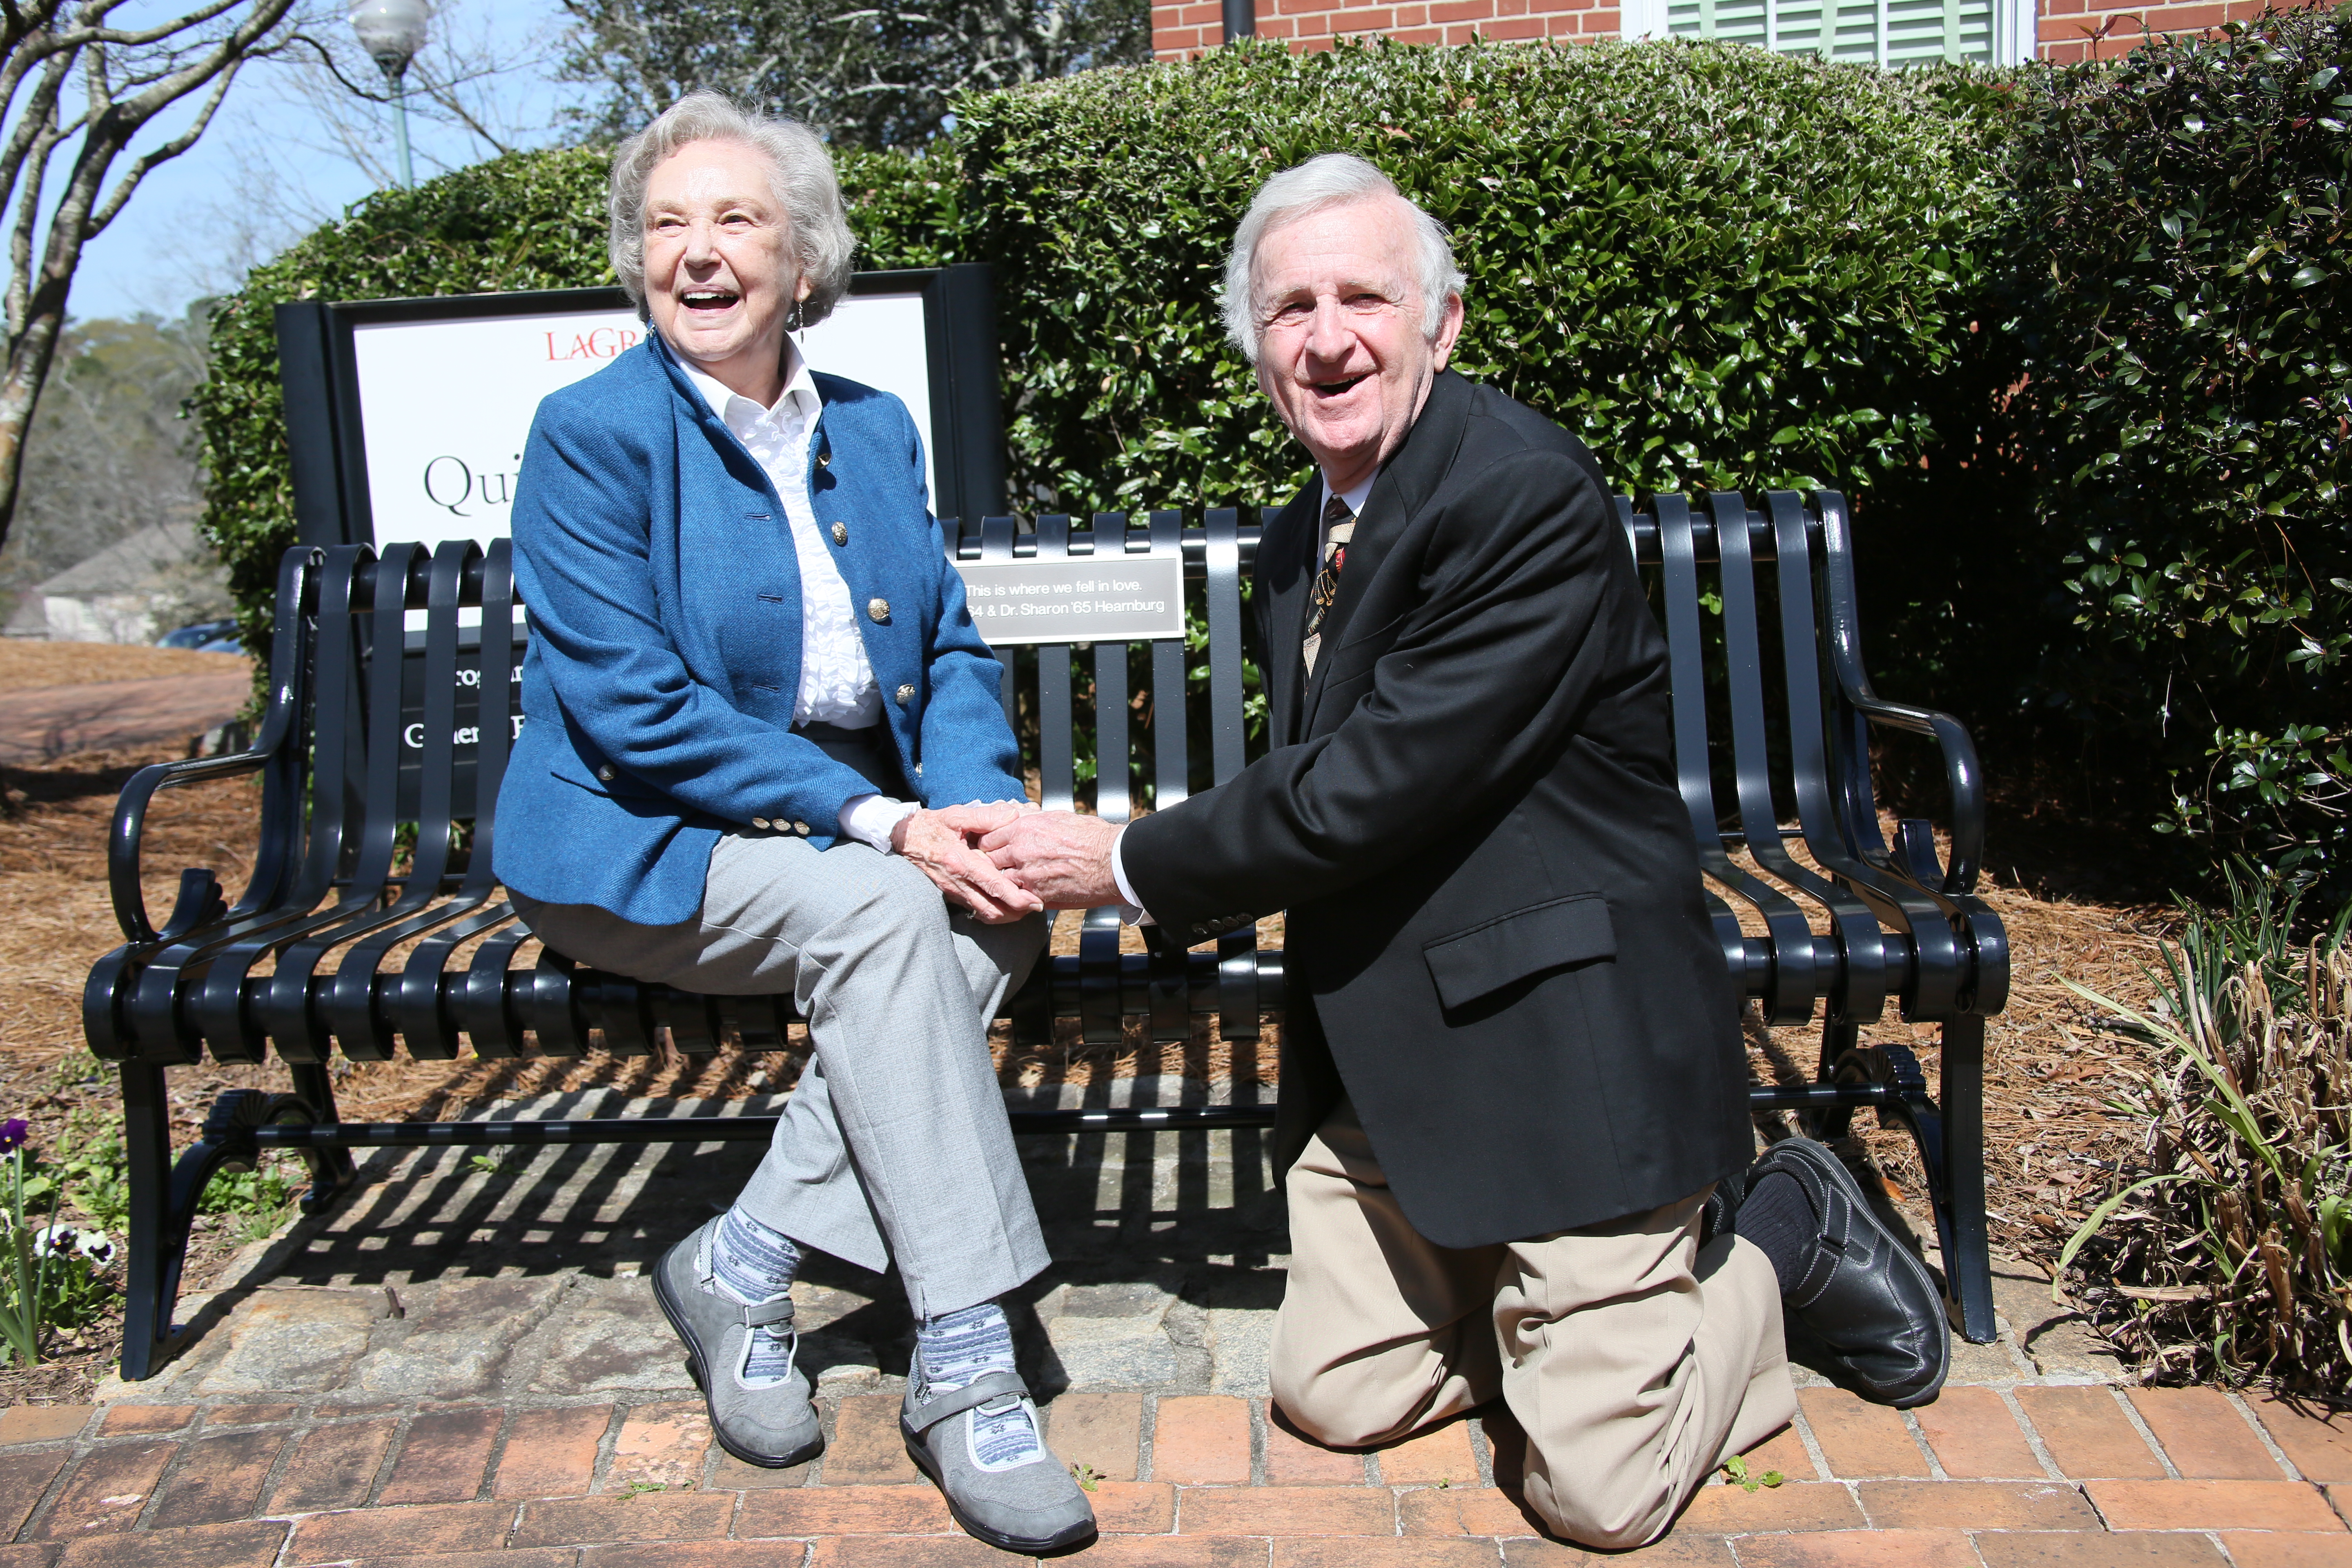 Bill '64 and Sharon '65 Hearnburg recreate their engagement in front of their bench outside the Quillian building. 